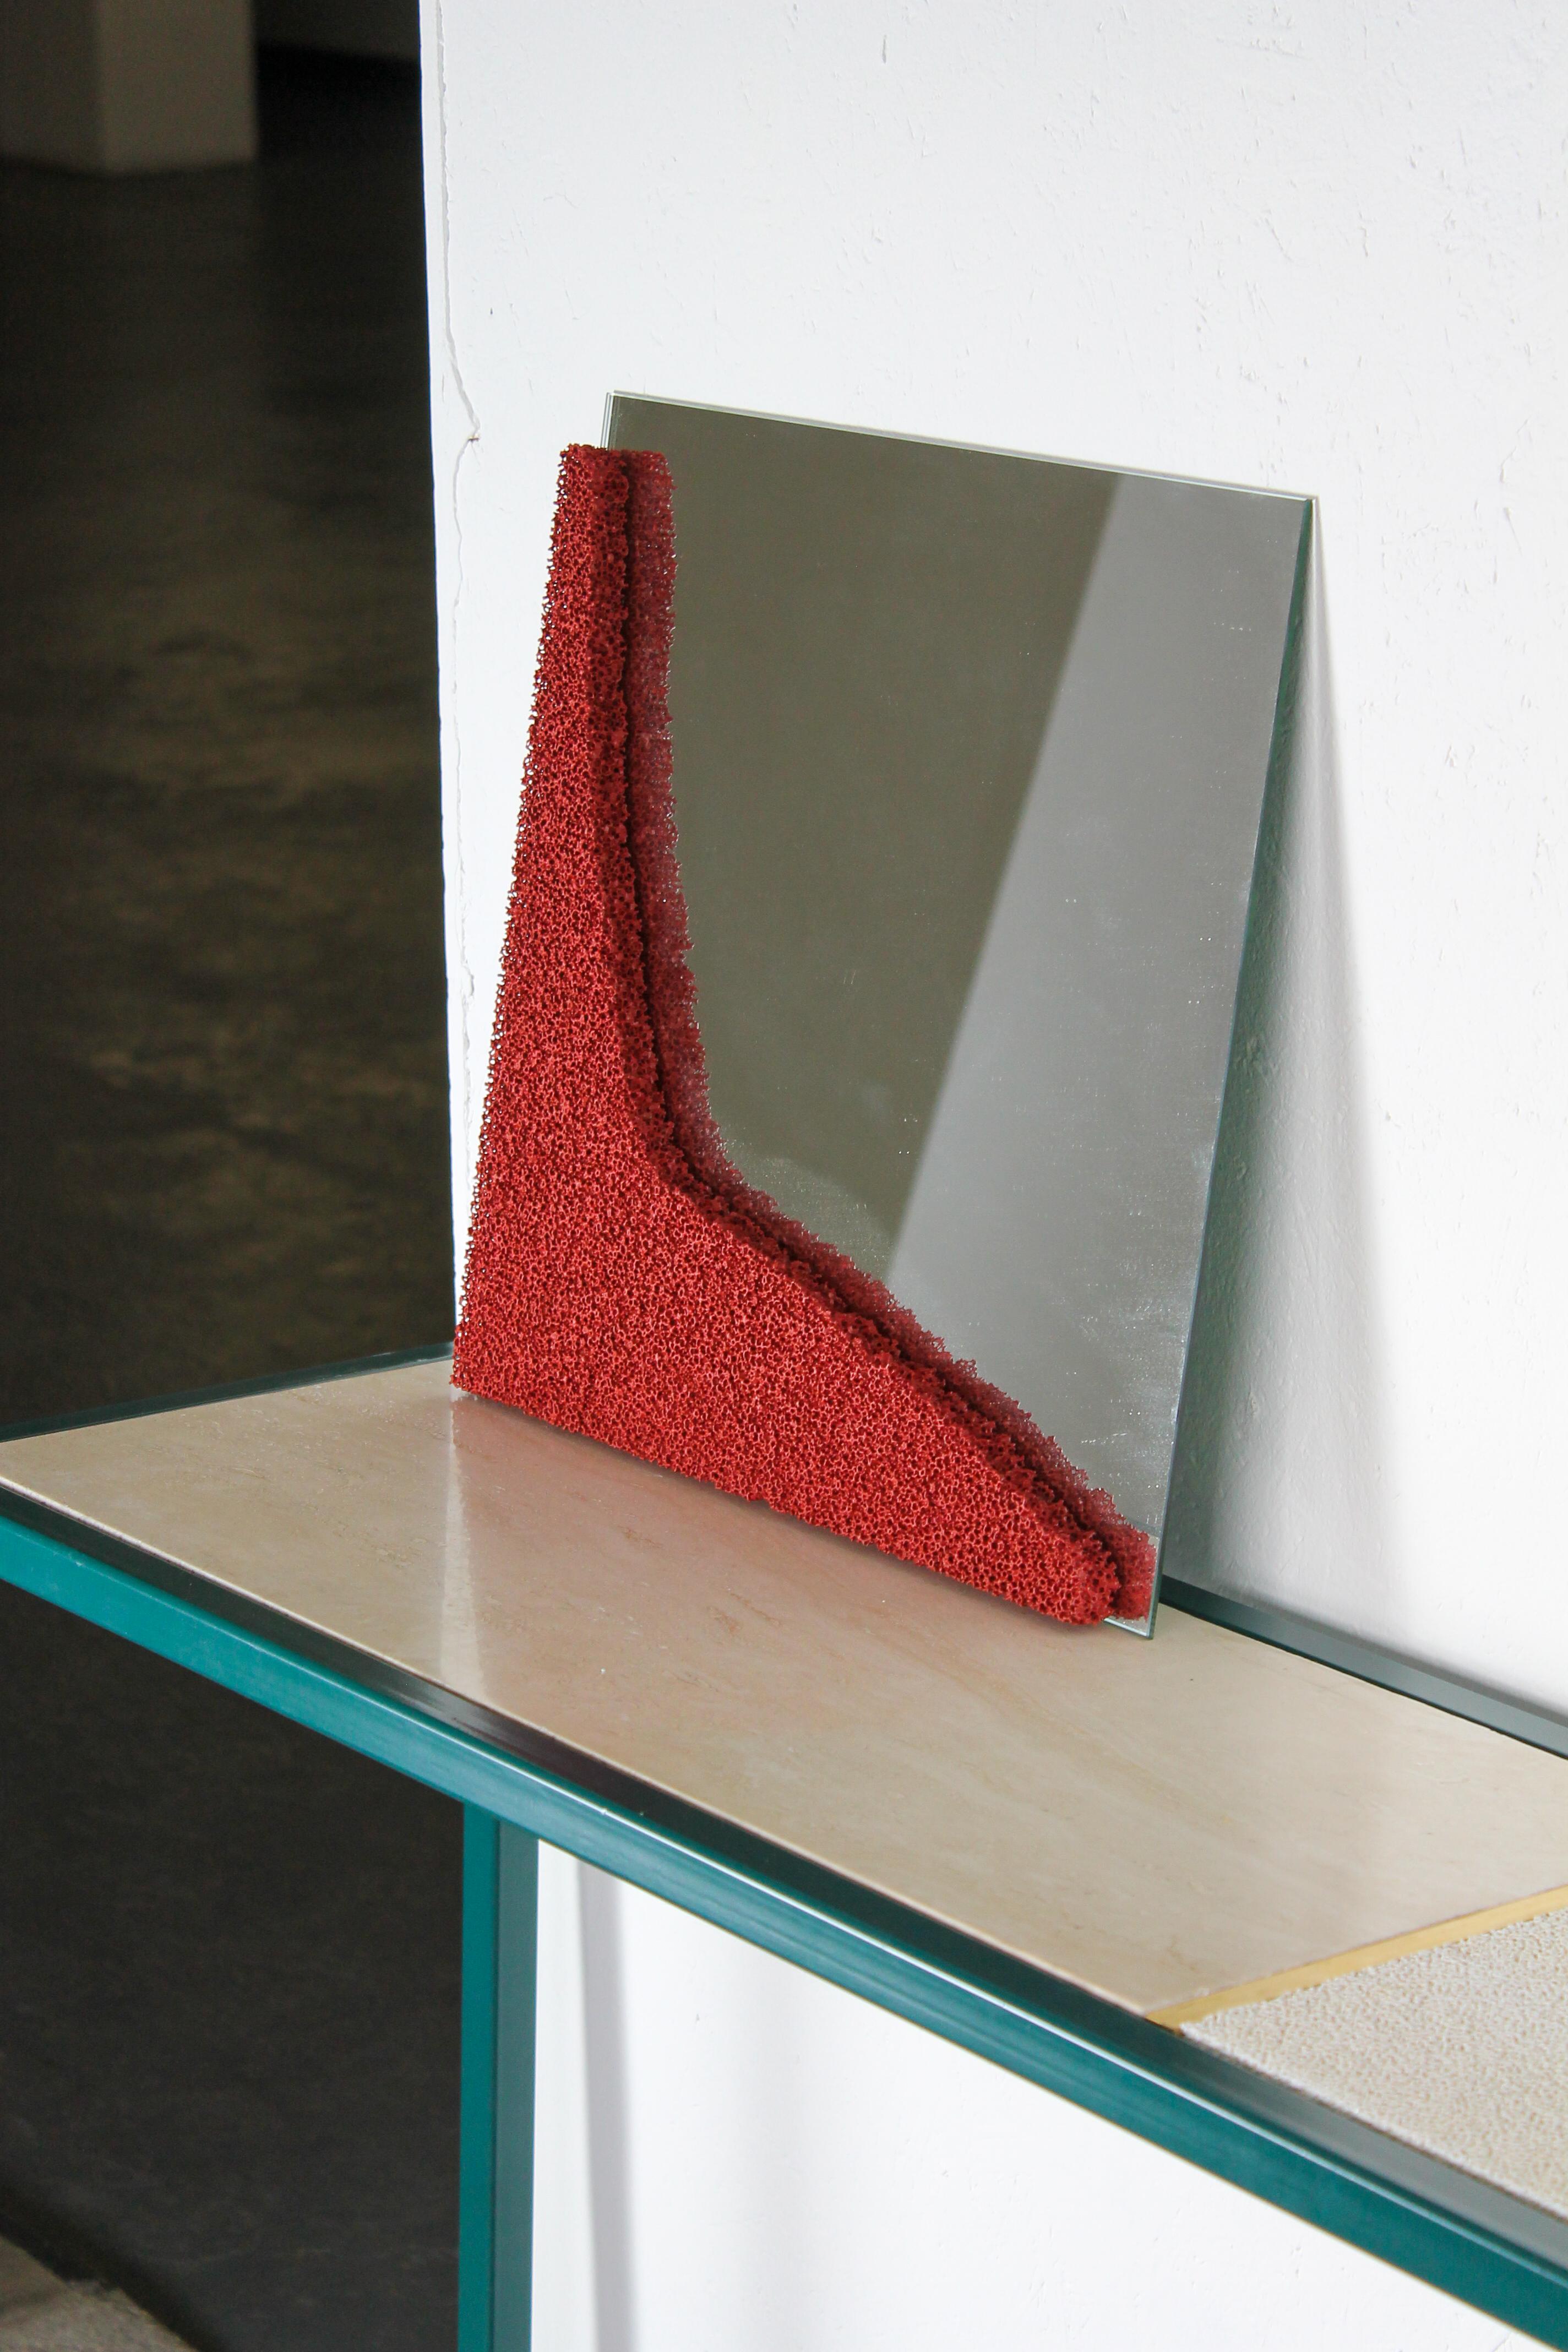 SS, Small Square, Ceramic Foam Hanging Mirror by Jordan Keaney In New Condition For Sale In London, GB